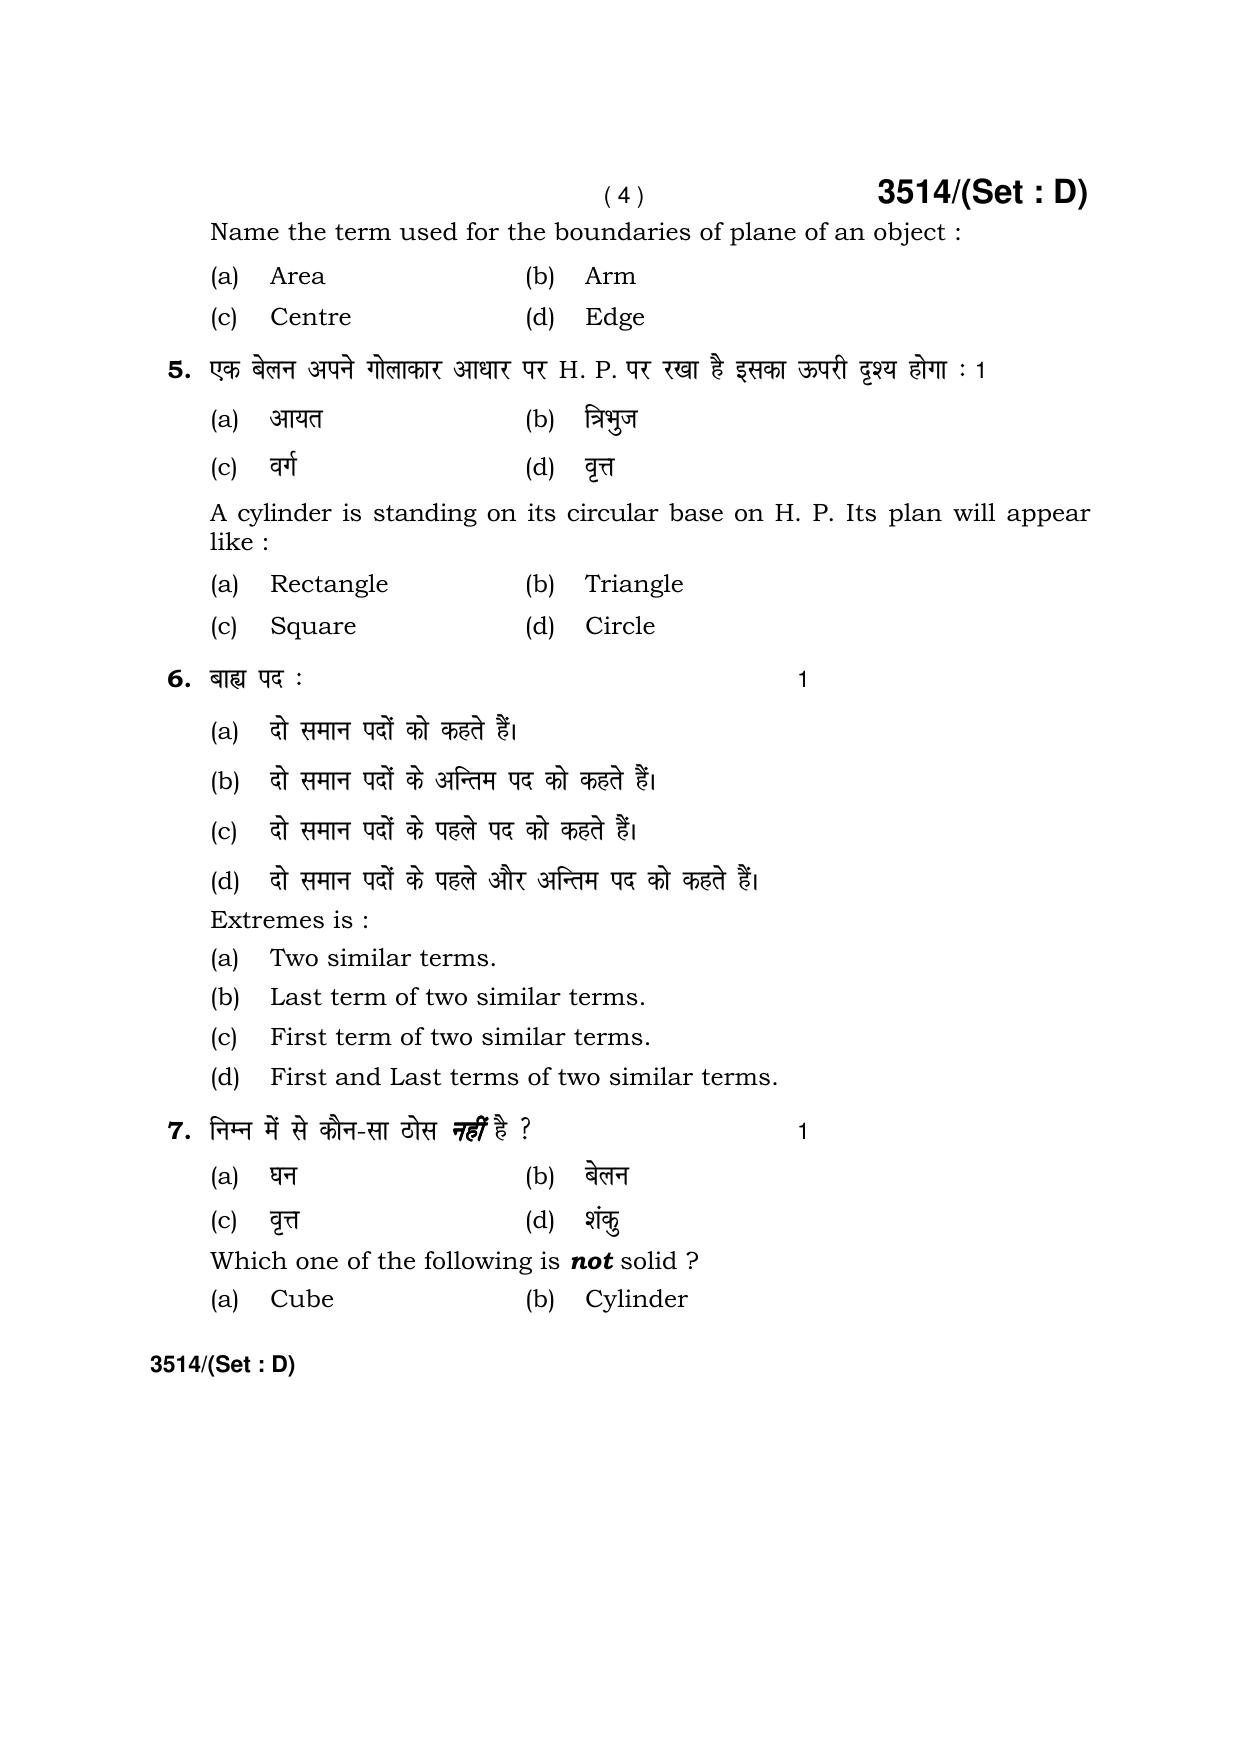 Haryana Board HBSE Class 10 Drawing -D 2018 Question Paper - Page 4